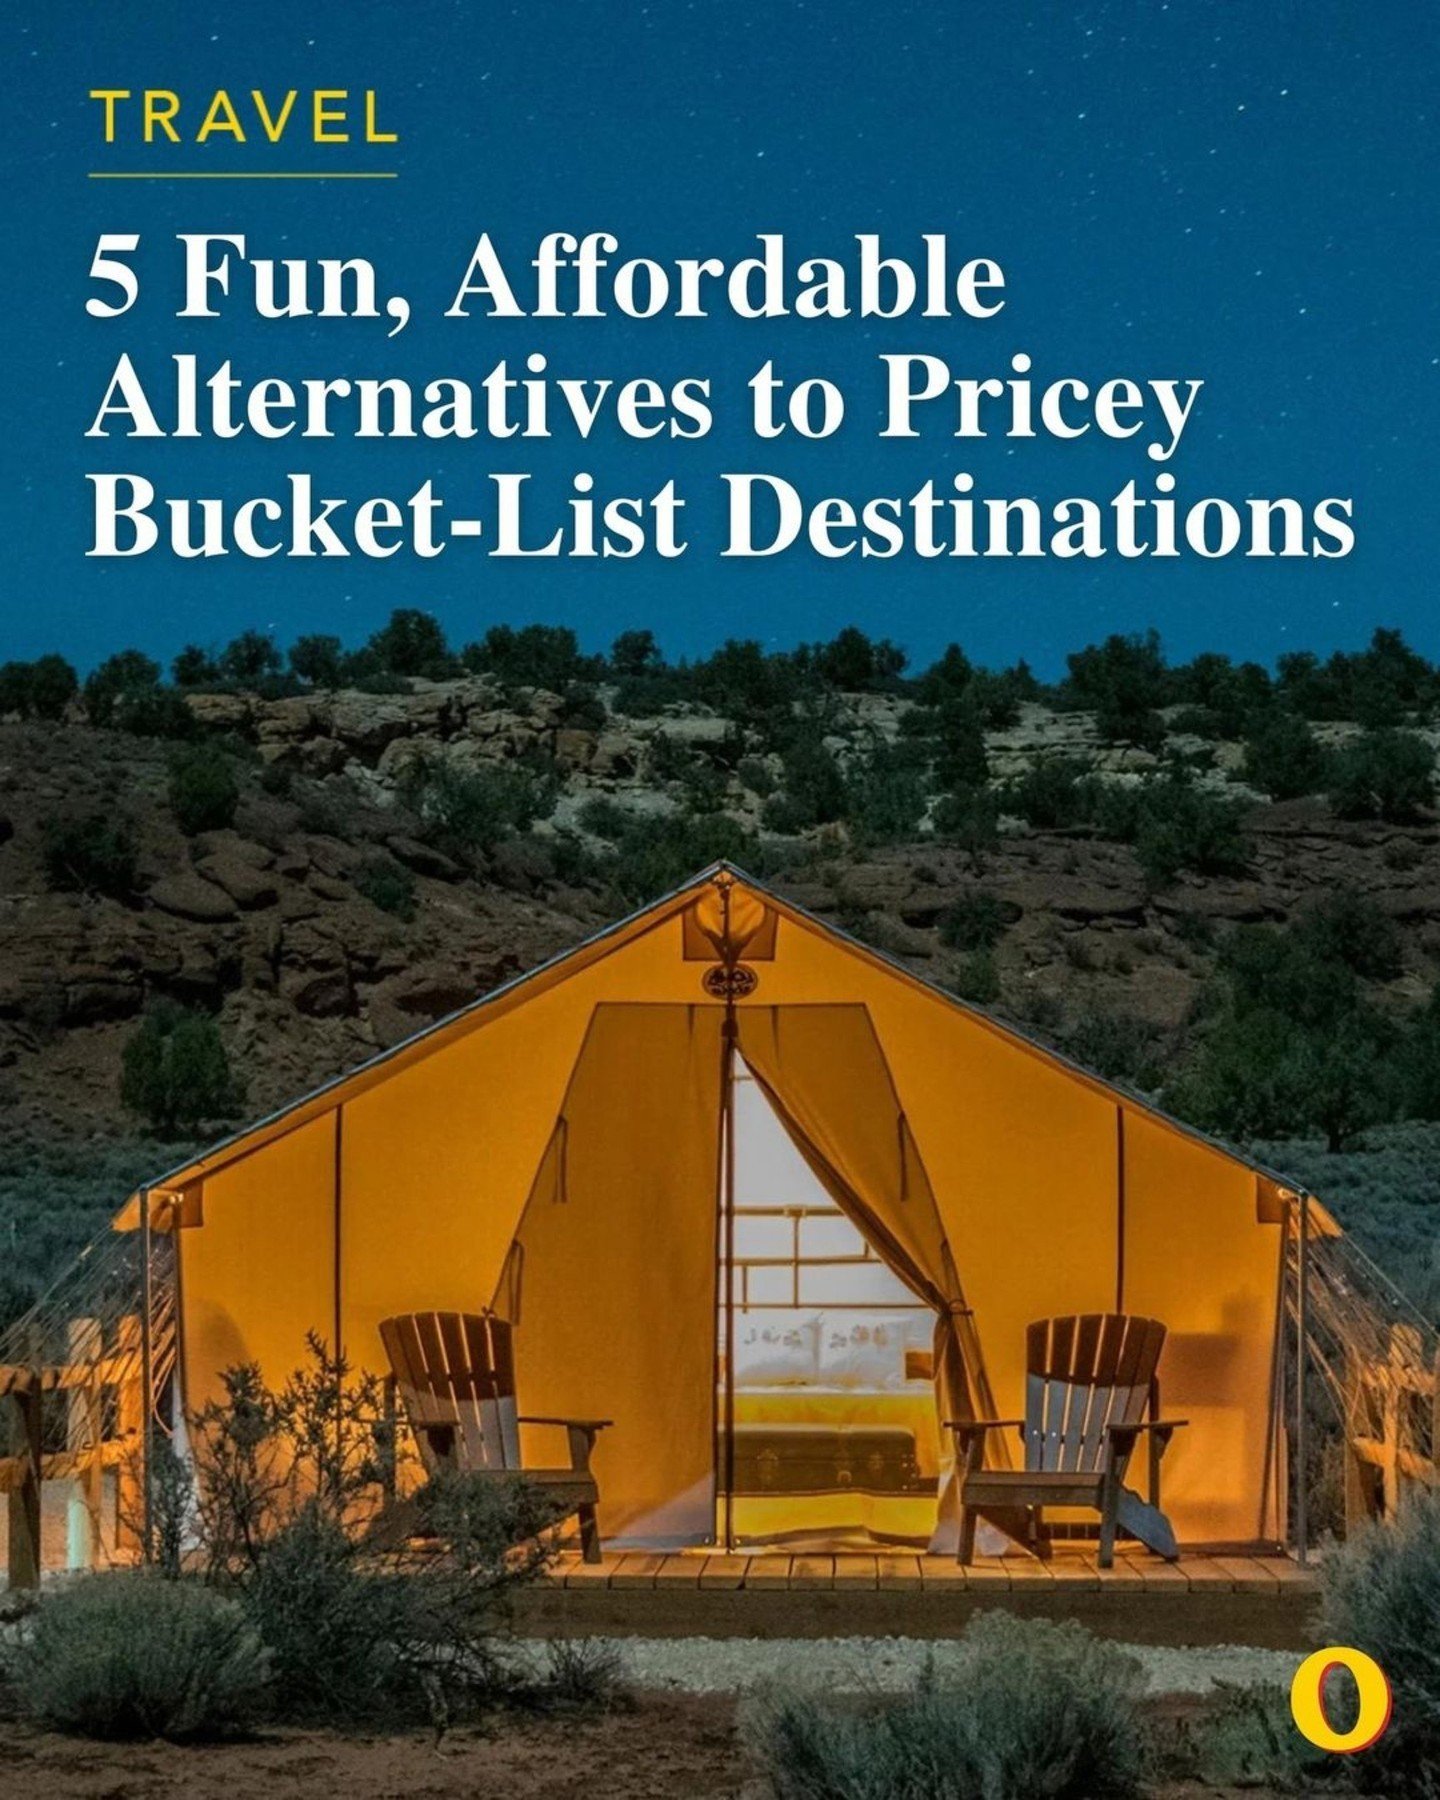 Well, we&rsquo;re certainly flattered to be featured in @outsidemagazine&rsquo;s recent article by @jenrunsworld!⁠
⁠
The article &ldquo;5 Fun, Affordable Alternatives to Pricey Bucket-List Destinations&rdquo; crowns BaseCamp37 as a Southwest glamping